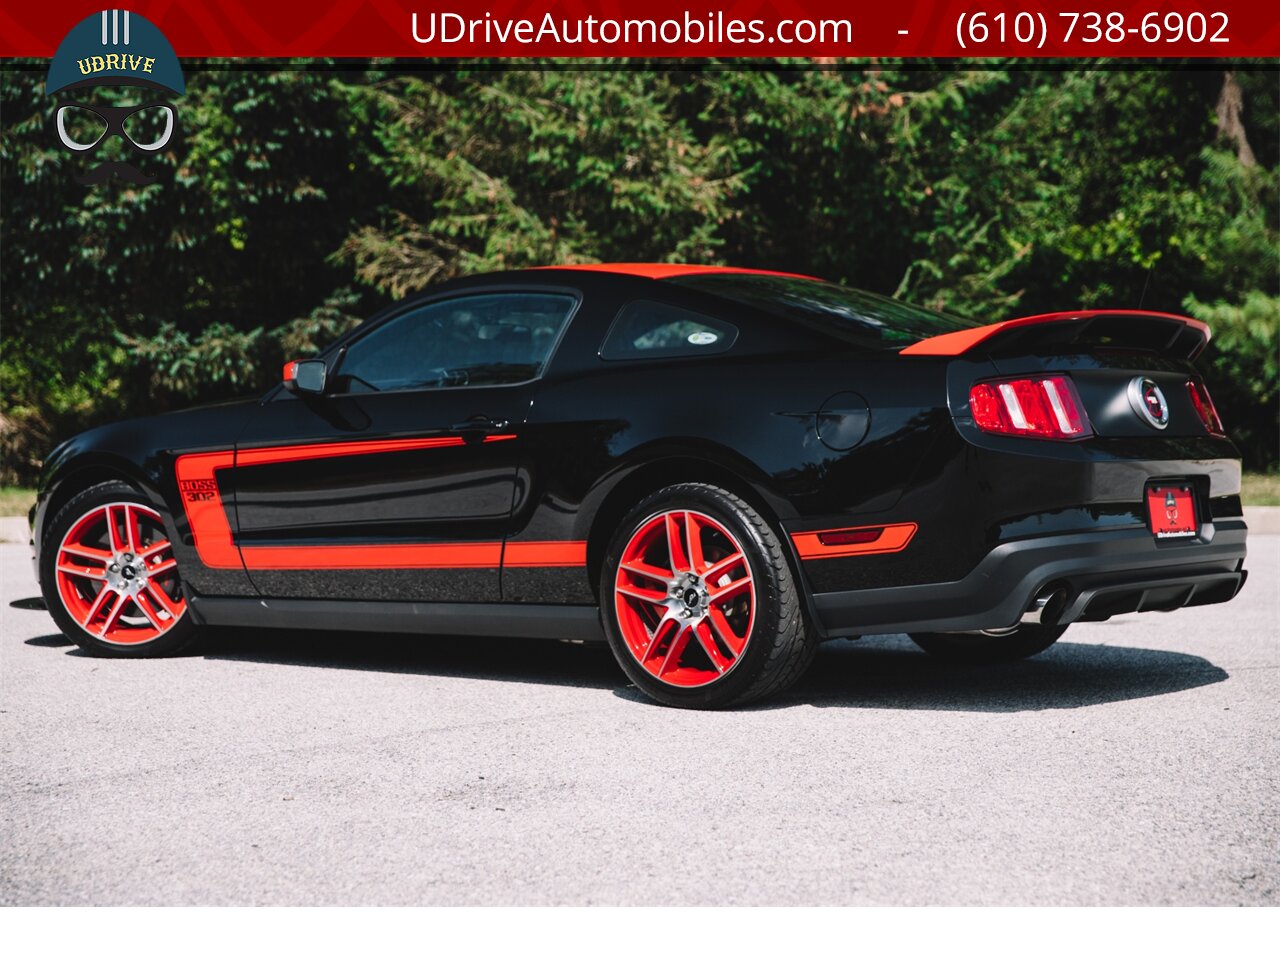 2012 Ford Mustang 866 Miles Boss 302 Laguna Seca #338 of 750  Red TracKey Activated - Photo 2 - West Chester, PA 19382